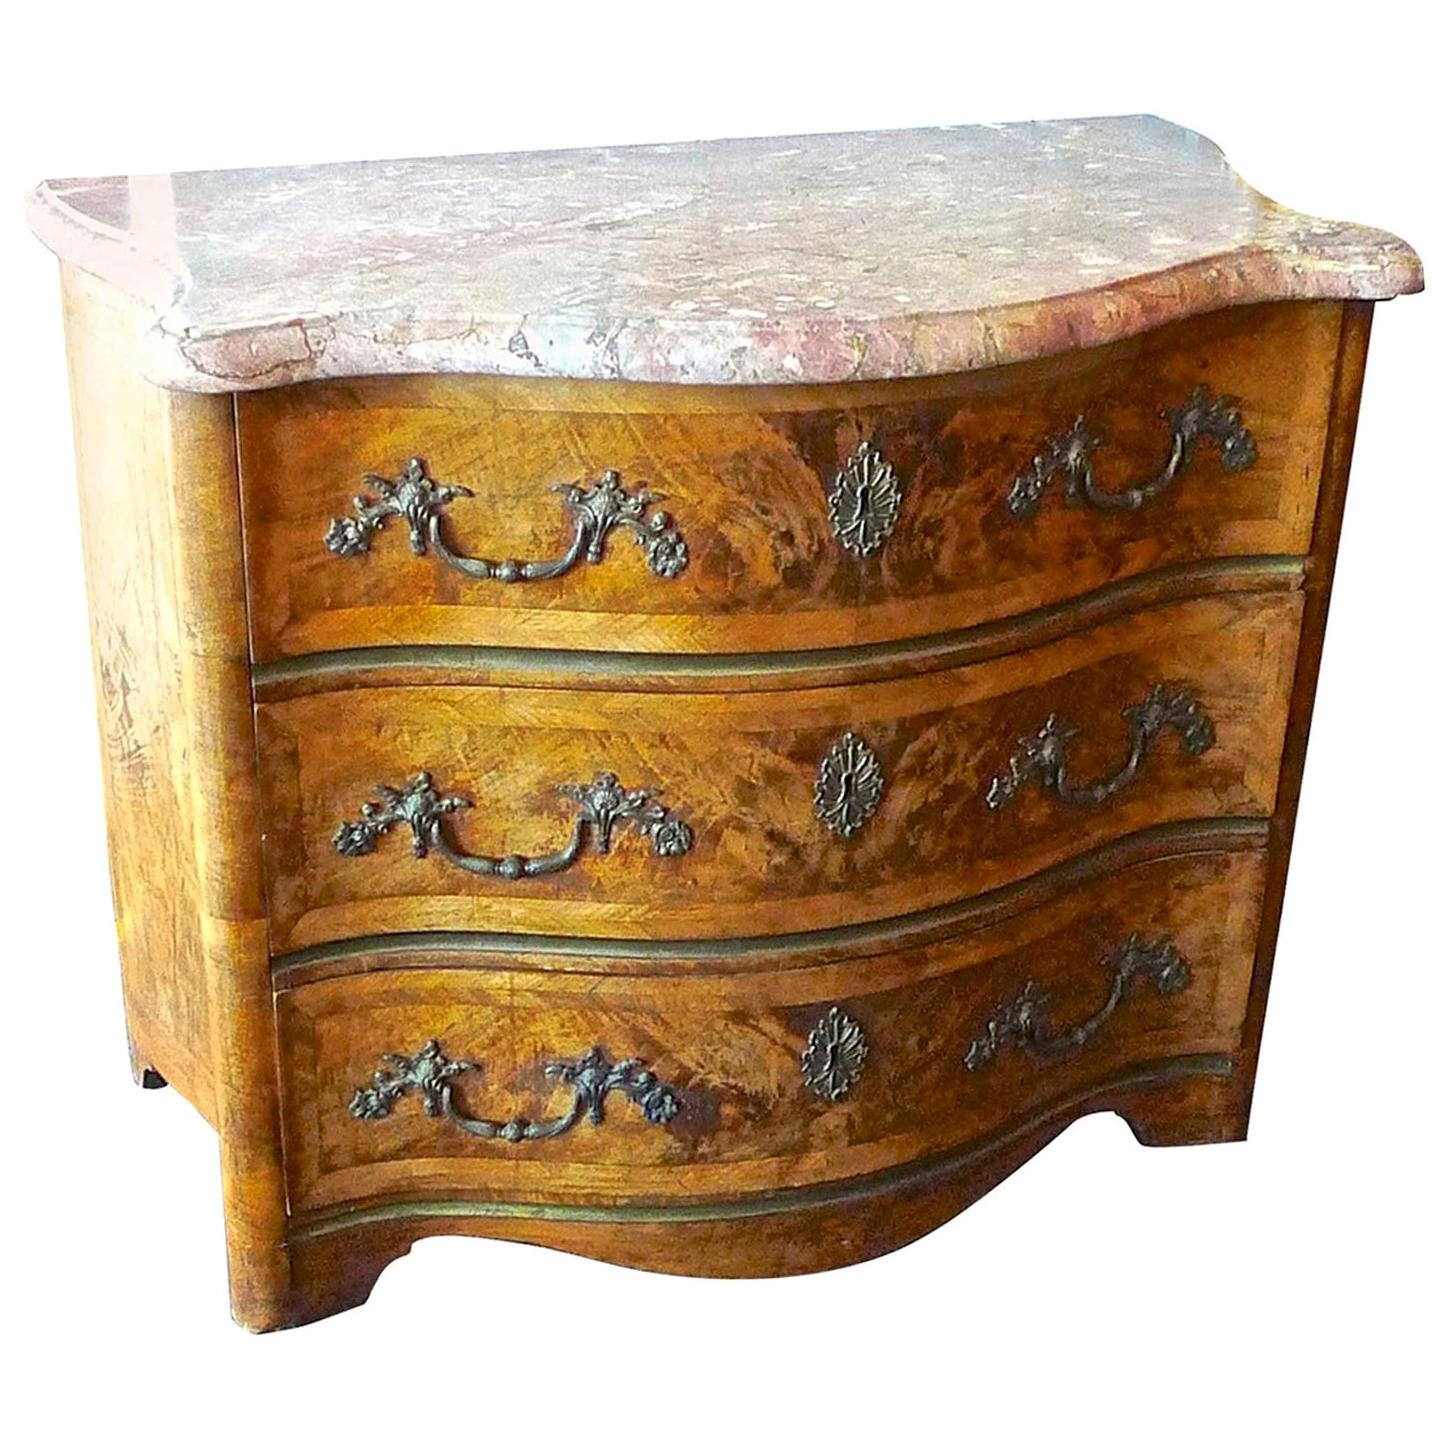 French 19th Century Bow-Fronted Burl Walnut Chest of Drawers with a Marble Top